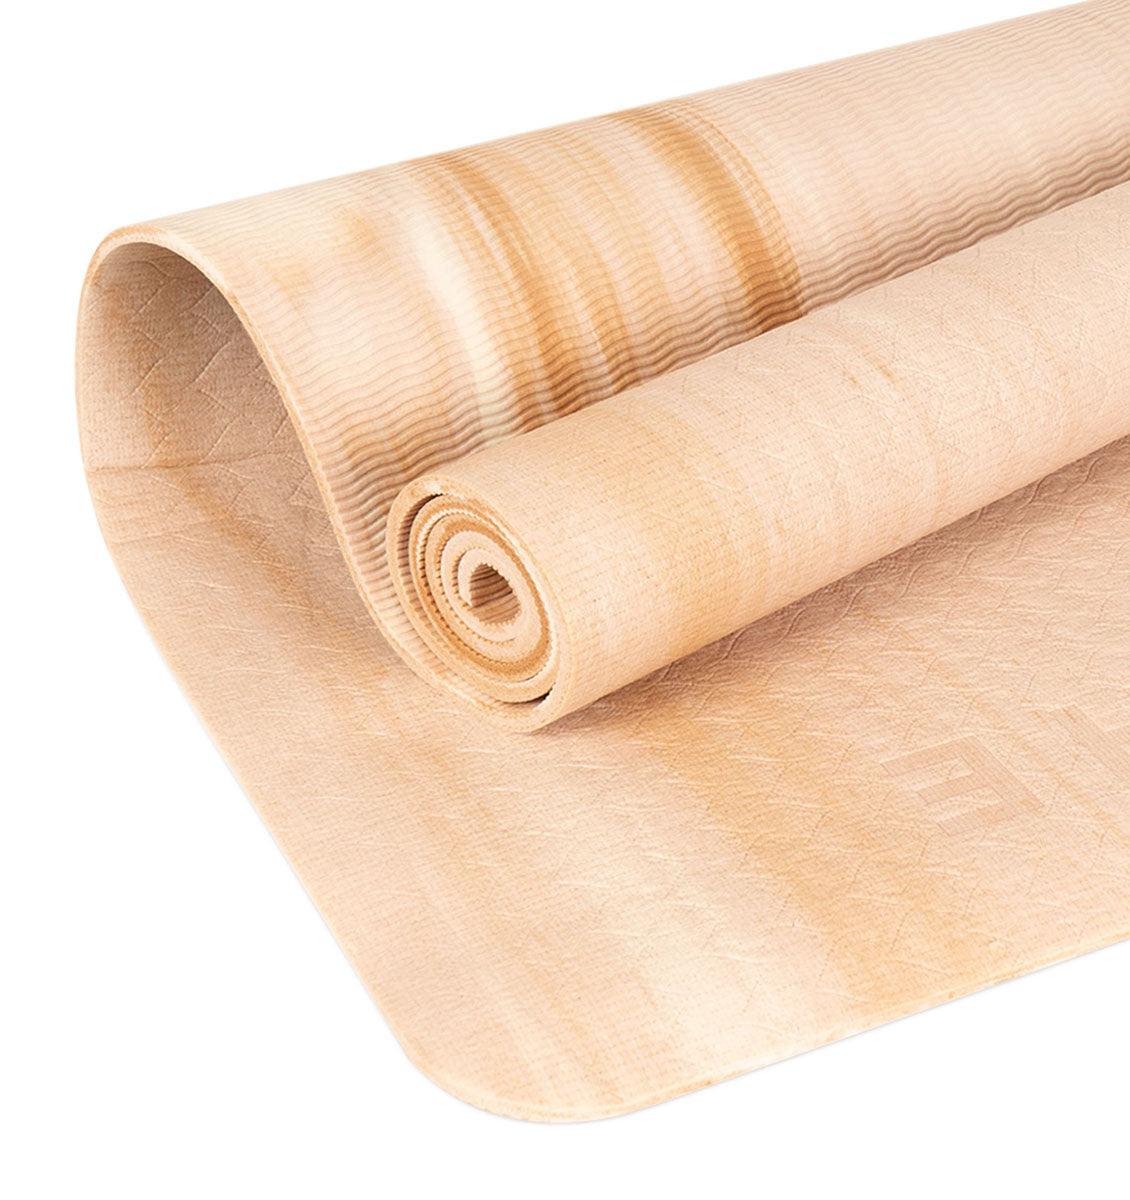 BAHE Prime Support Marble Yoga Mat - 6mm - Dusty Beige Marble